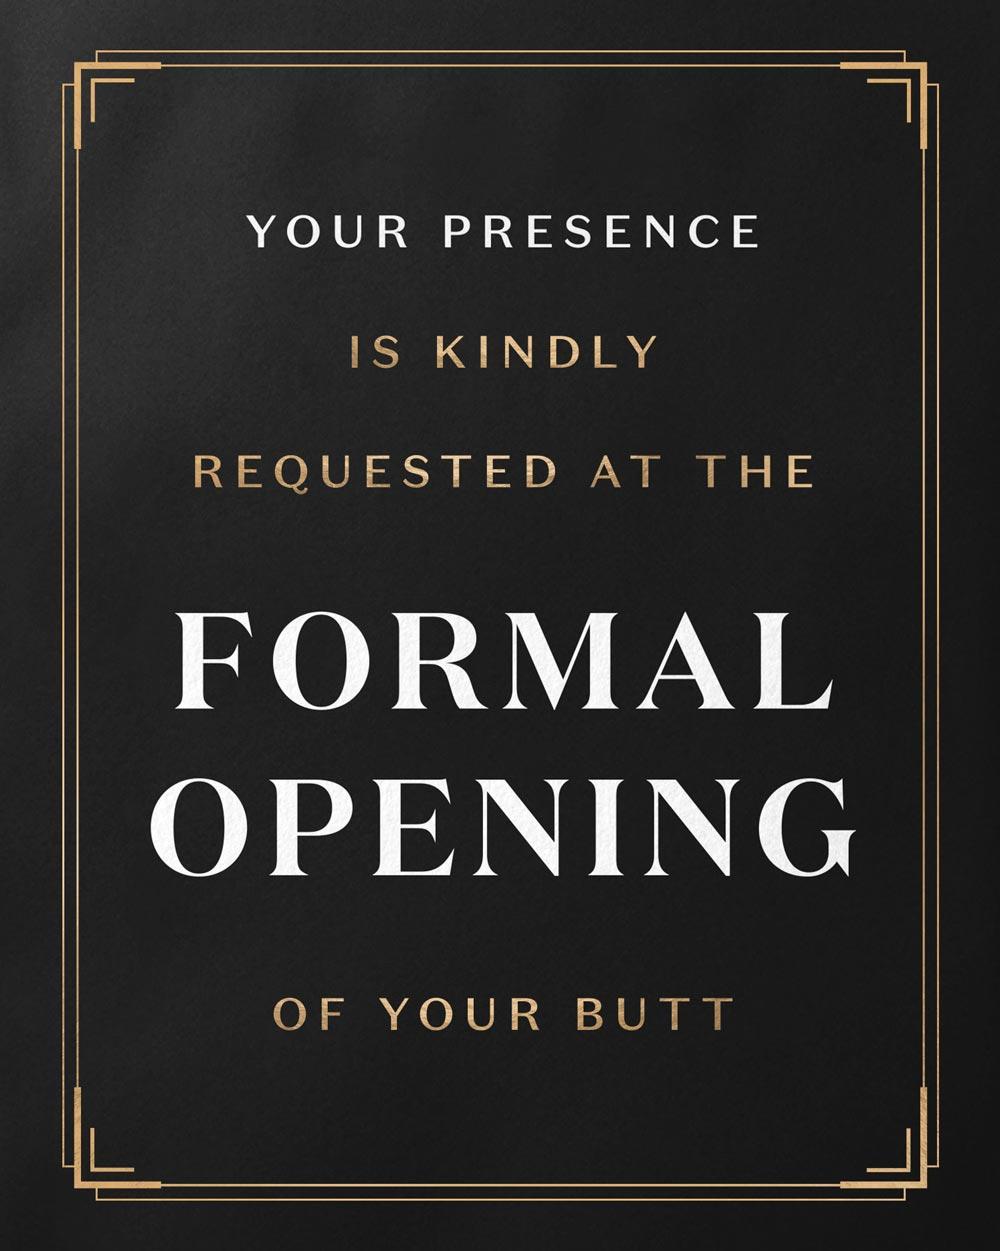 Your presence is kindly requested at the formal opening of your butt.